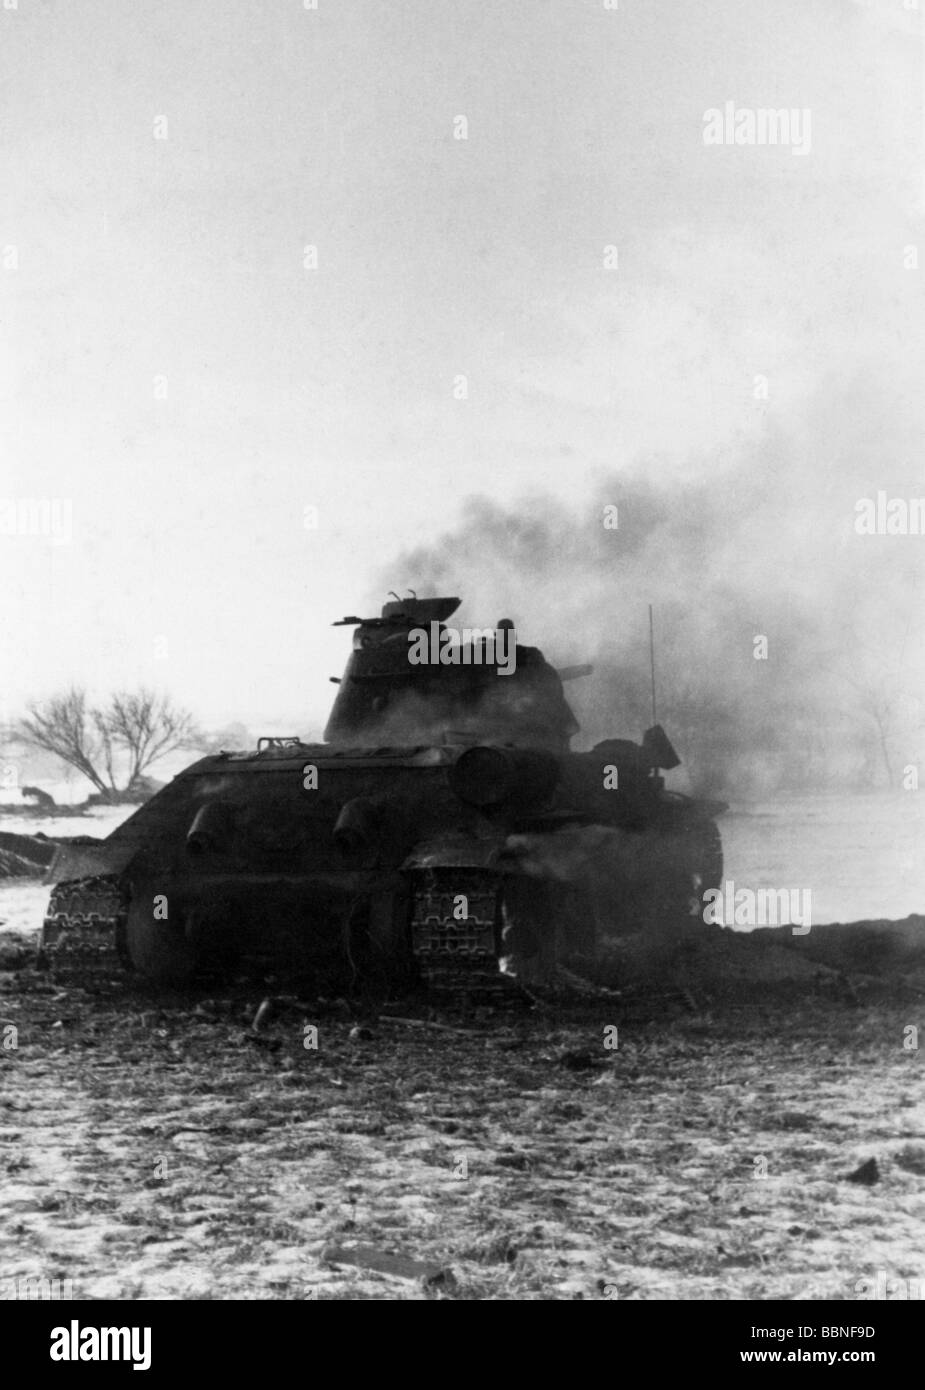 events, Second World War / WWII, Russia 1944 / 1945, knocked out Soviet T-34/76 tank near Britskoye, 24.1.1944, Eastern Front, USSR, winter, snow, 20th century, historic, historical, Ukraine, Army Group South, Soviet Union, losses, T34, T 34, destroyed, destruction, burning, 1940s, Stock Photo